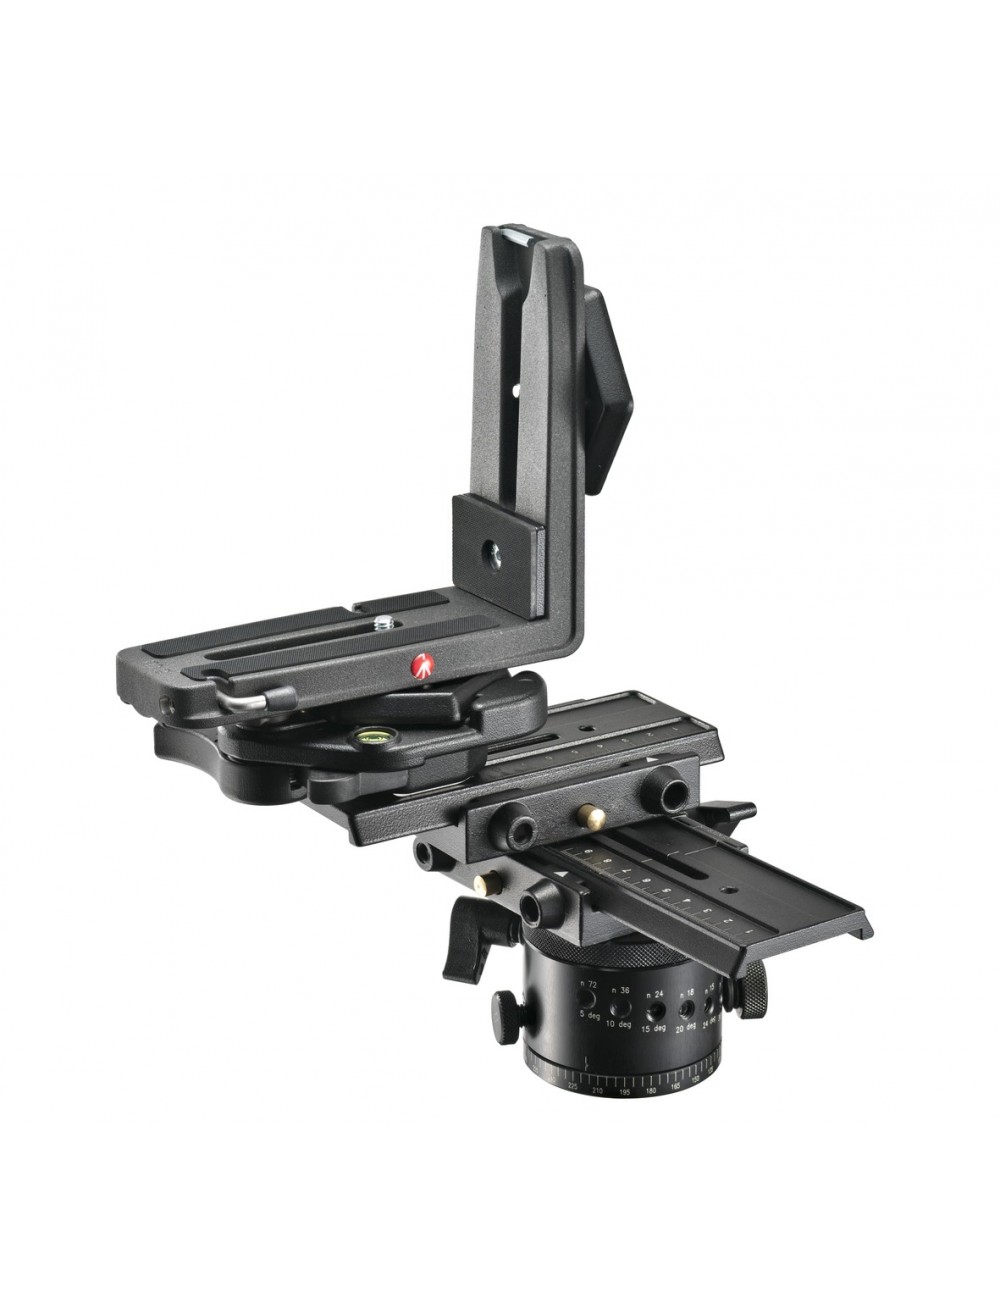 Panoramic head MH057A5 Manfrotto - 
Precise virtual reality and pan head
Durable aluminium construction
Camera can be positioned